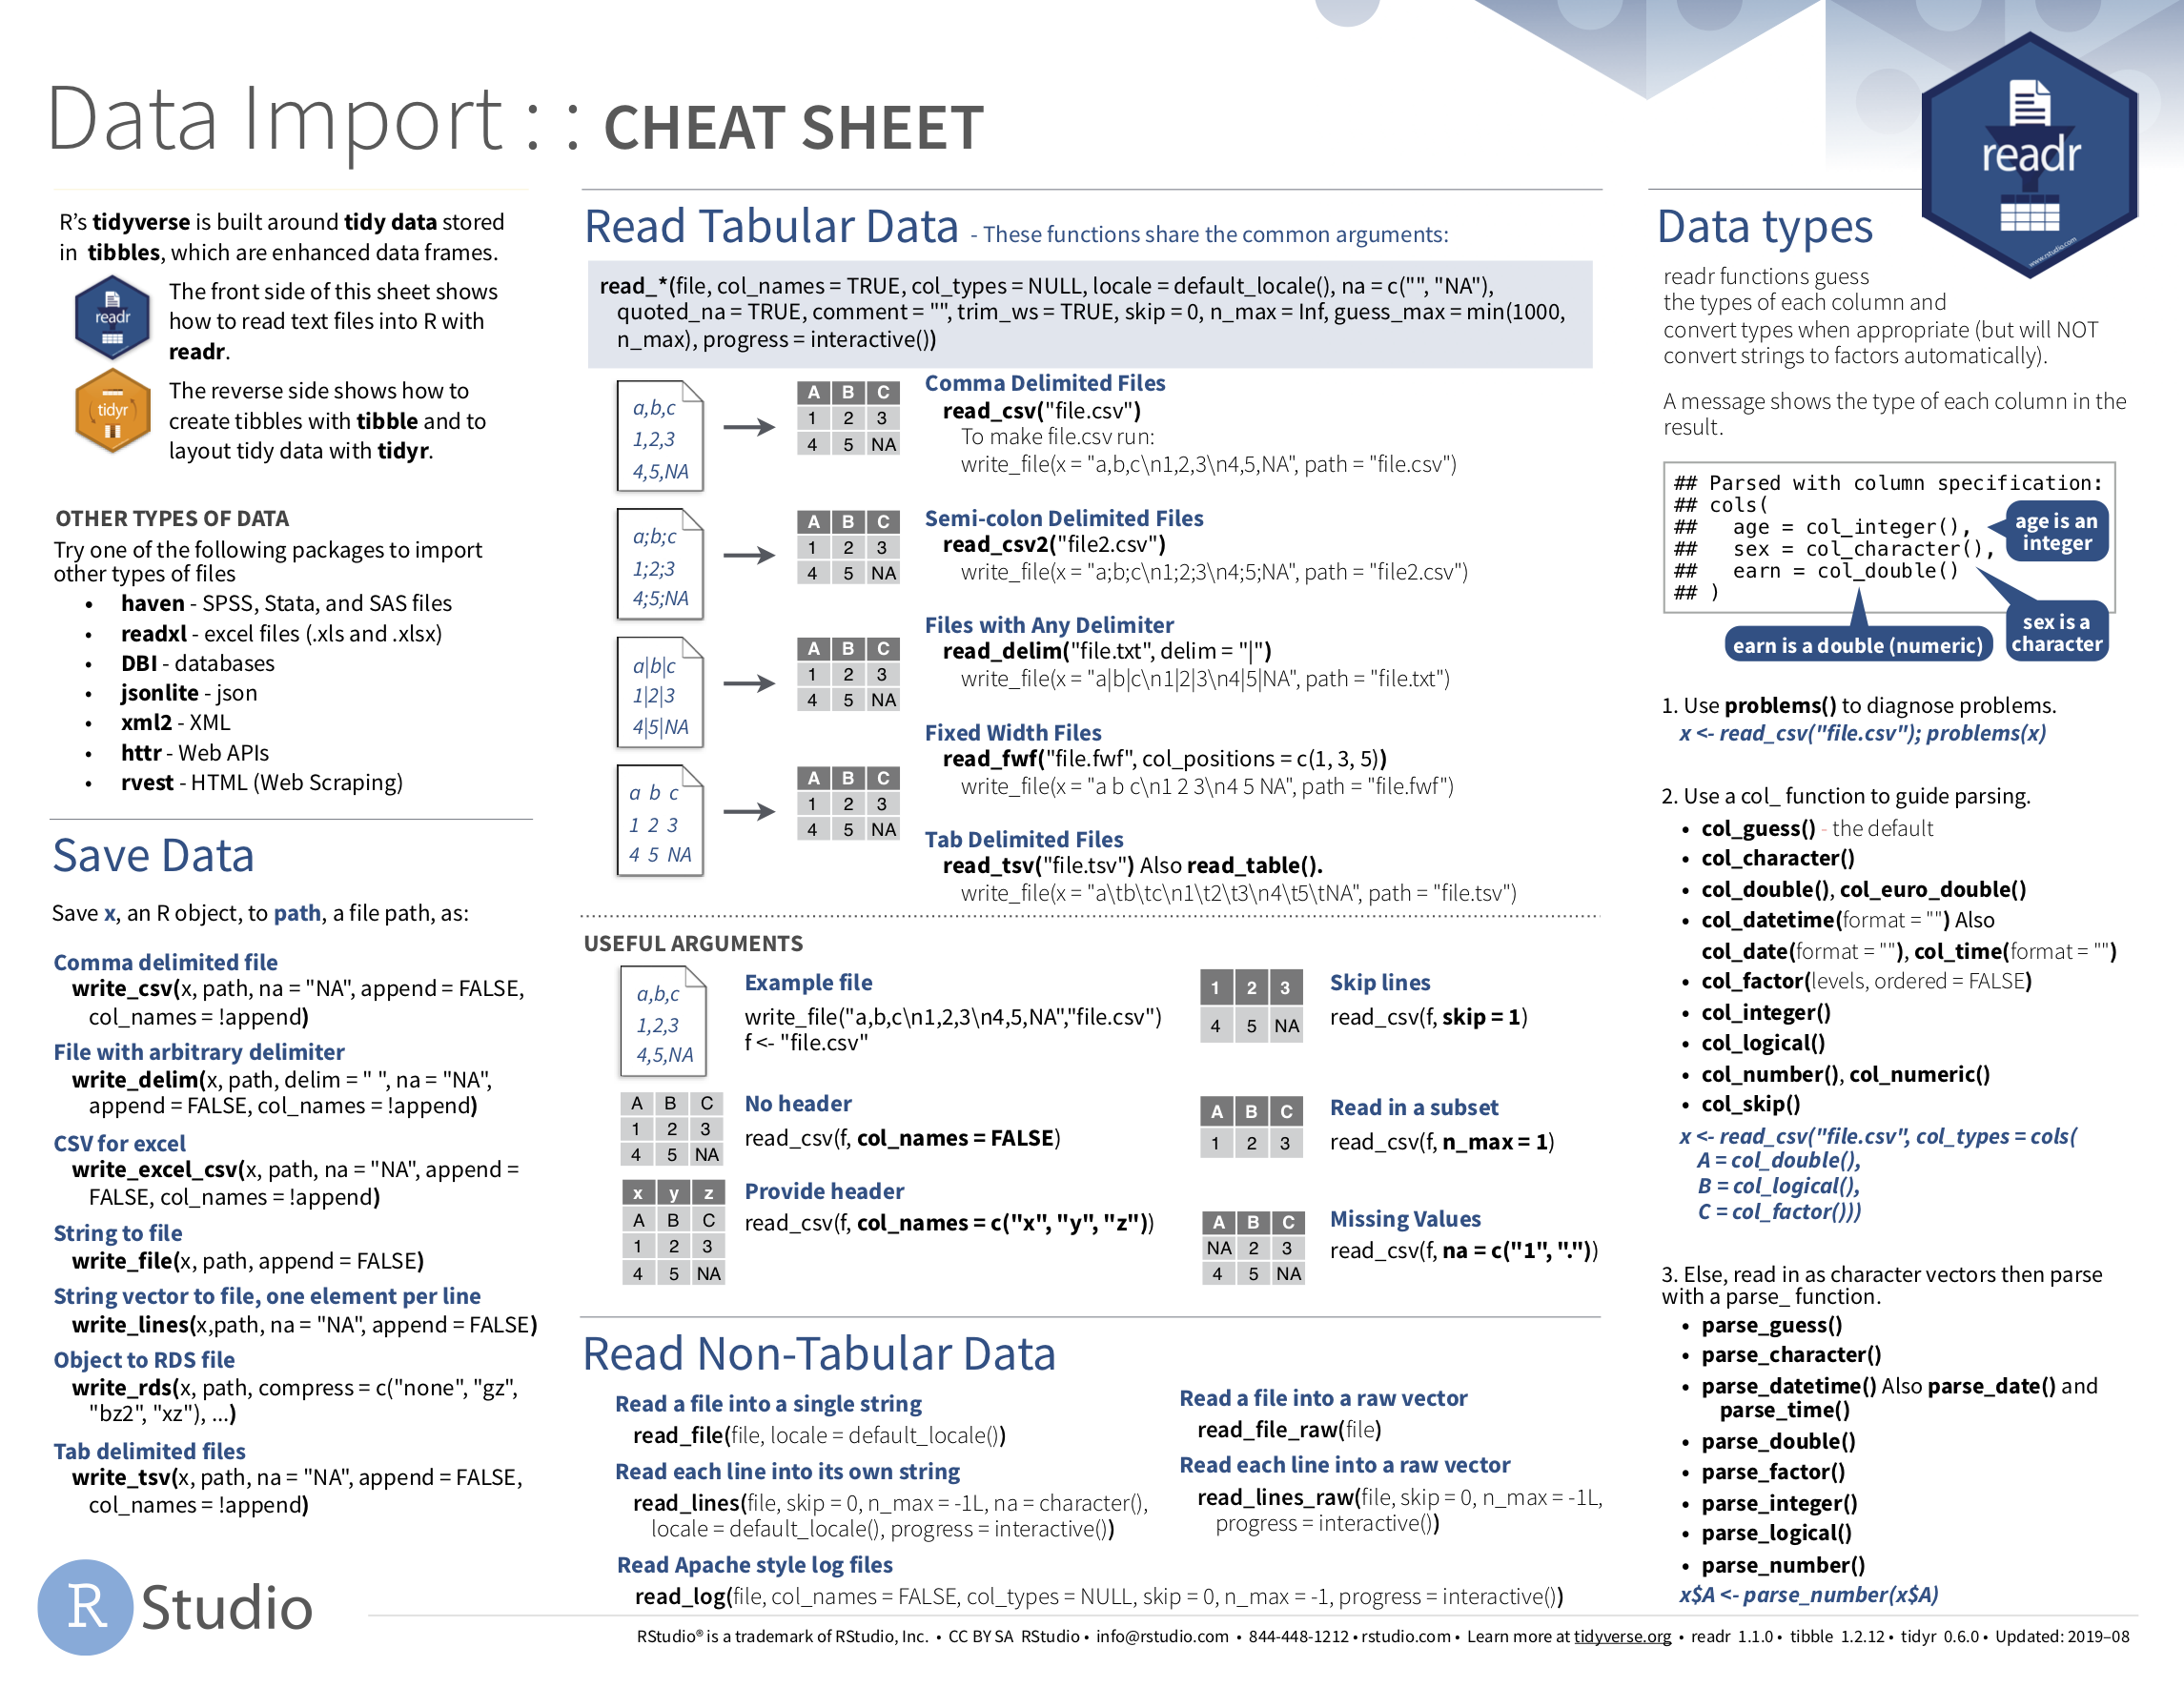 Data Import cheatsheet (first page): readr package.